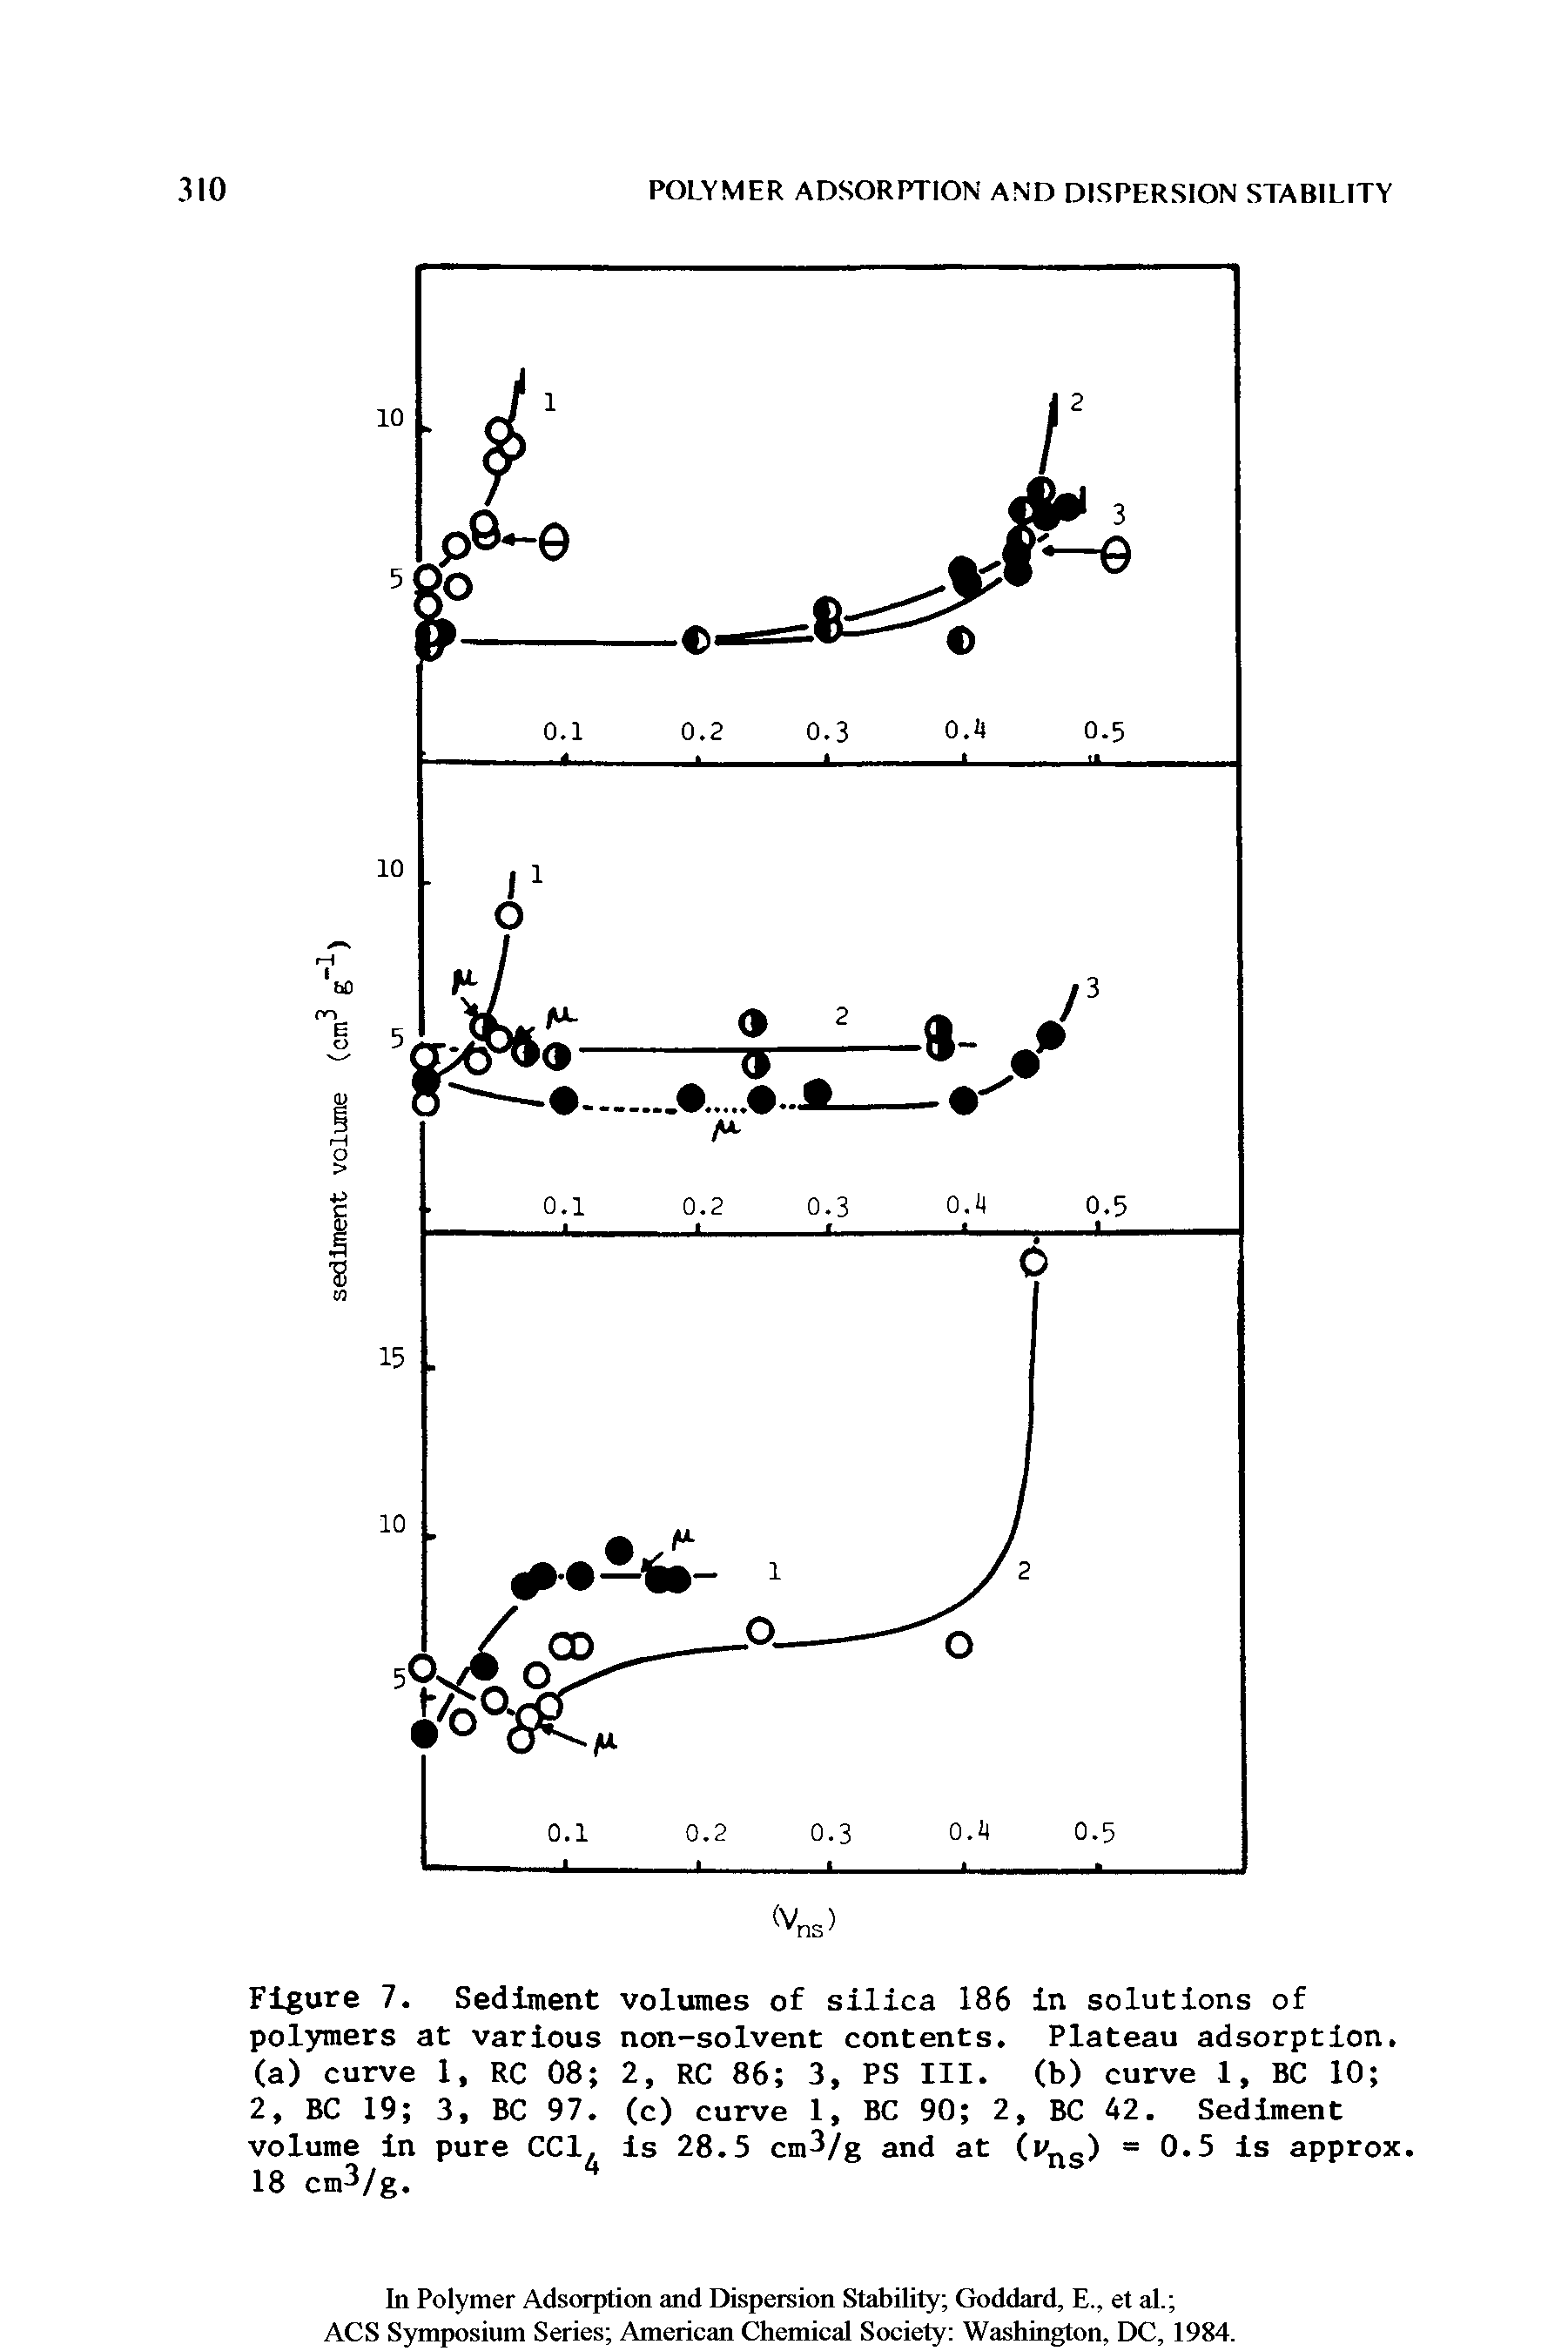 Figure 7. Sediment volumes of silica 186 in solutions of polymers at various non-solvent contents. Plateau adsorption, (a) curve 1, RC 08 2, RC 86 3, PS III. (b) curve 1, BC 10 ...